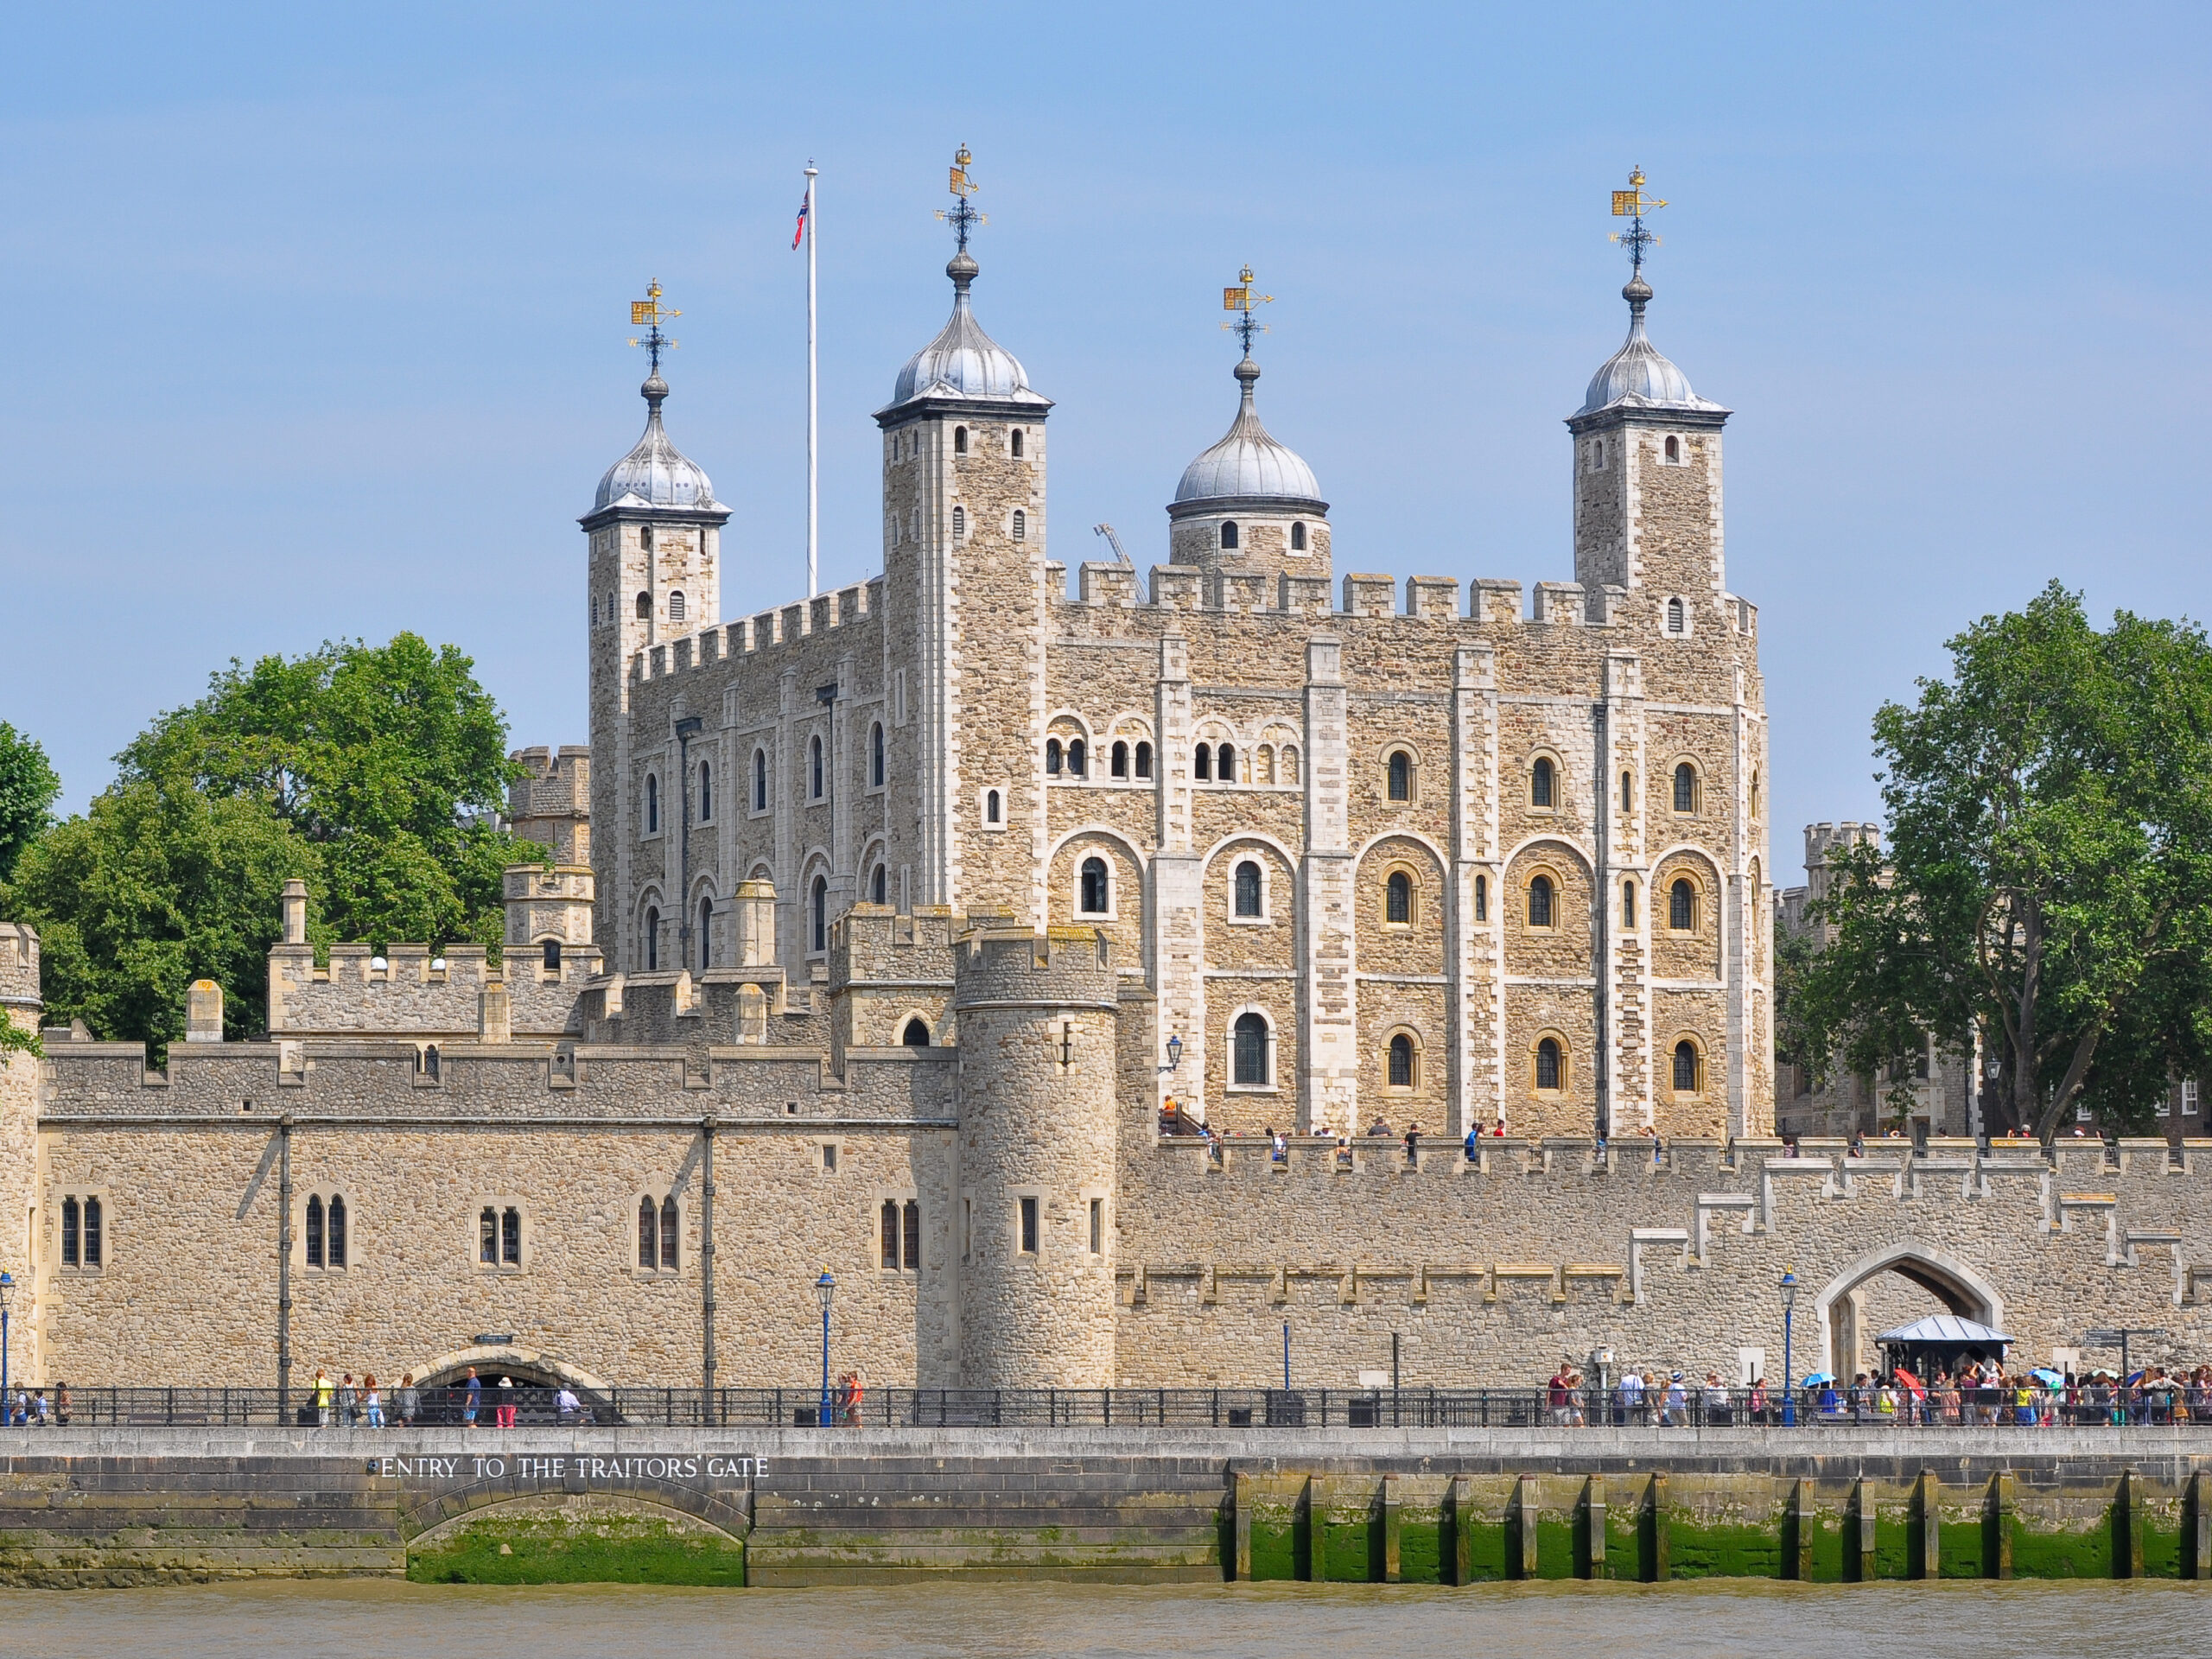 Must-see attractions in UK - The Tower Of London